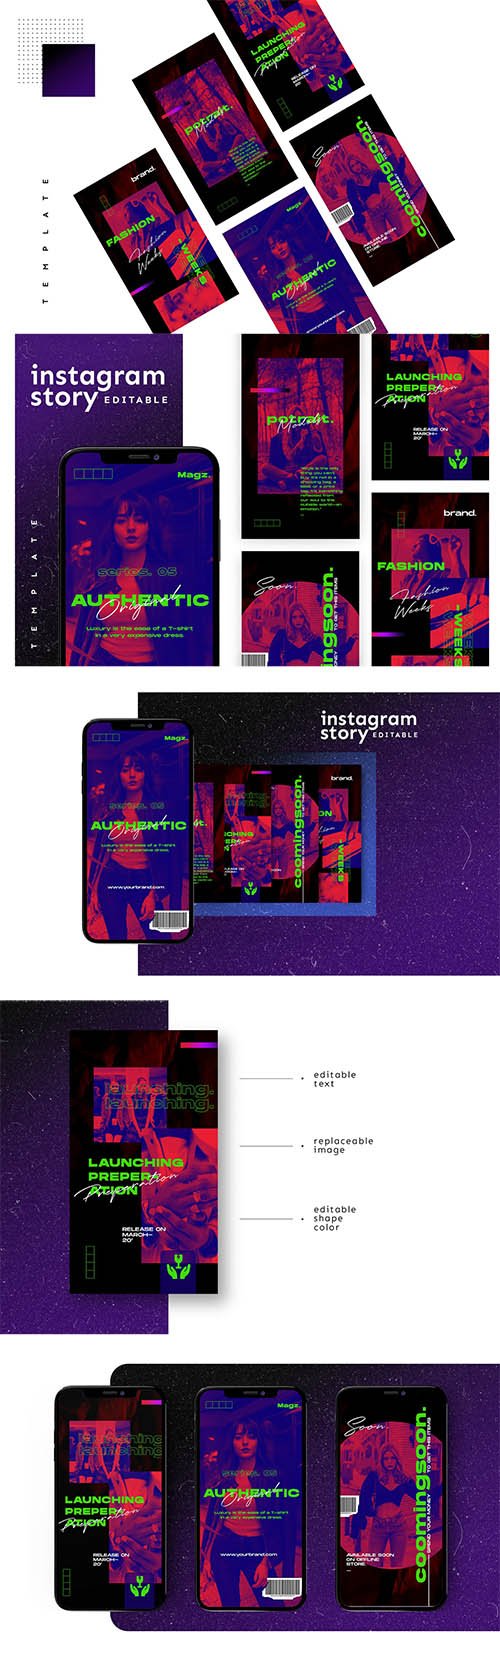 Instagram Story Template 4